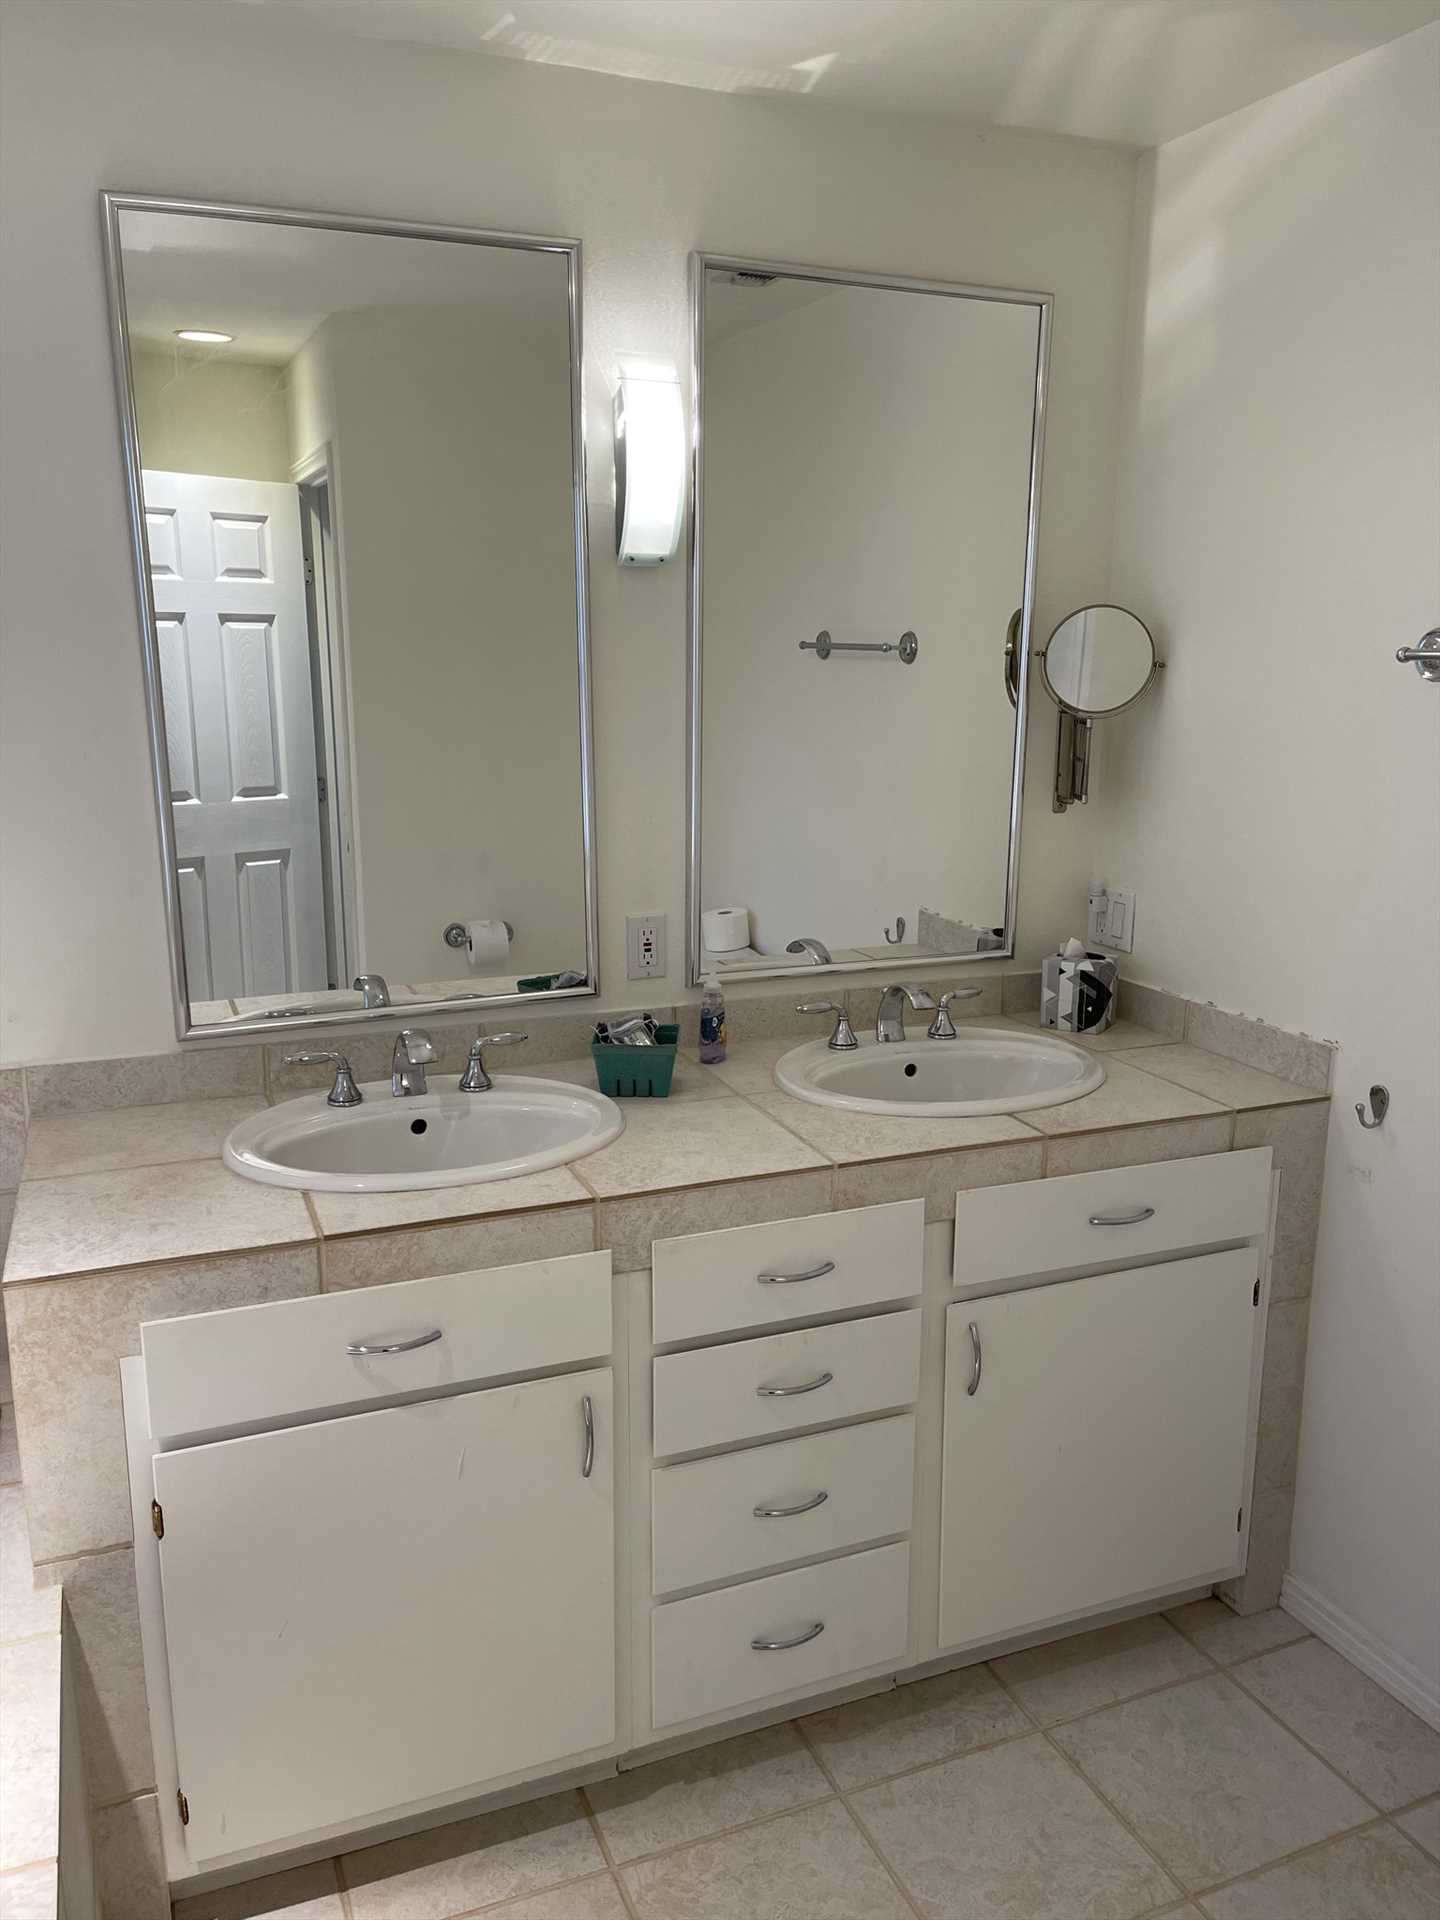                                                 Twin vanities and plenty of clean bath linens make it easy to get ready for your exciting day!